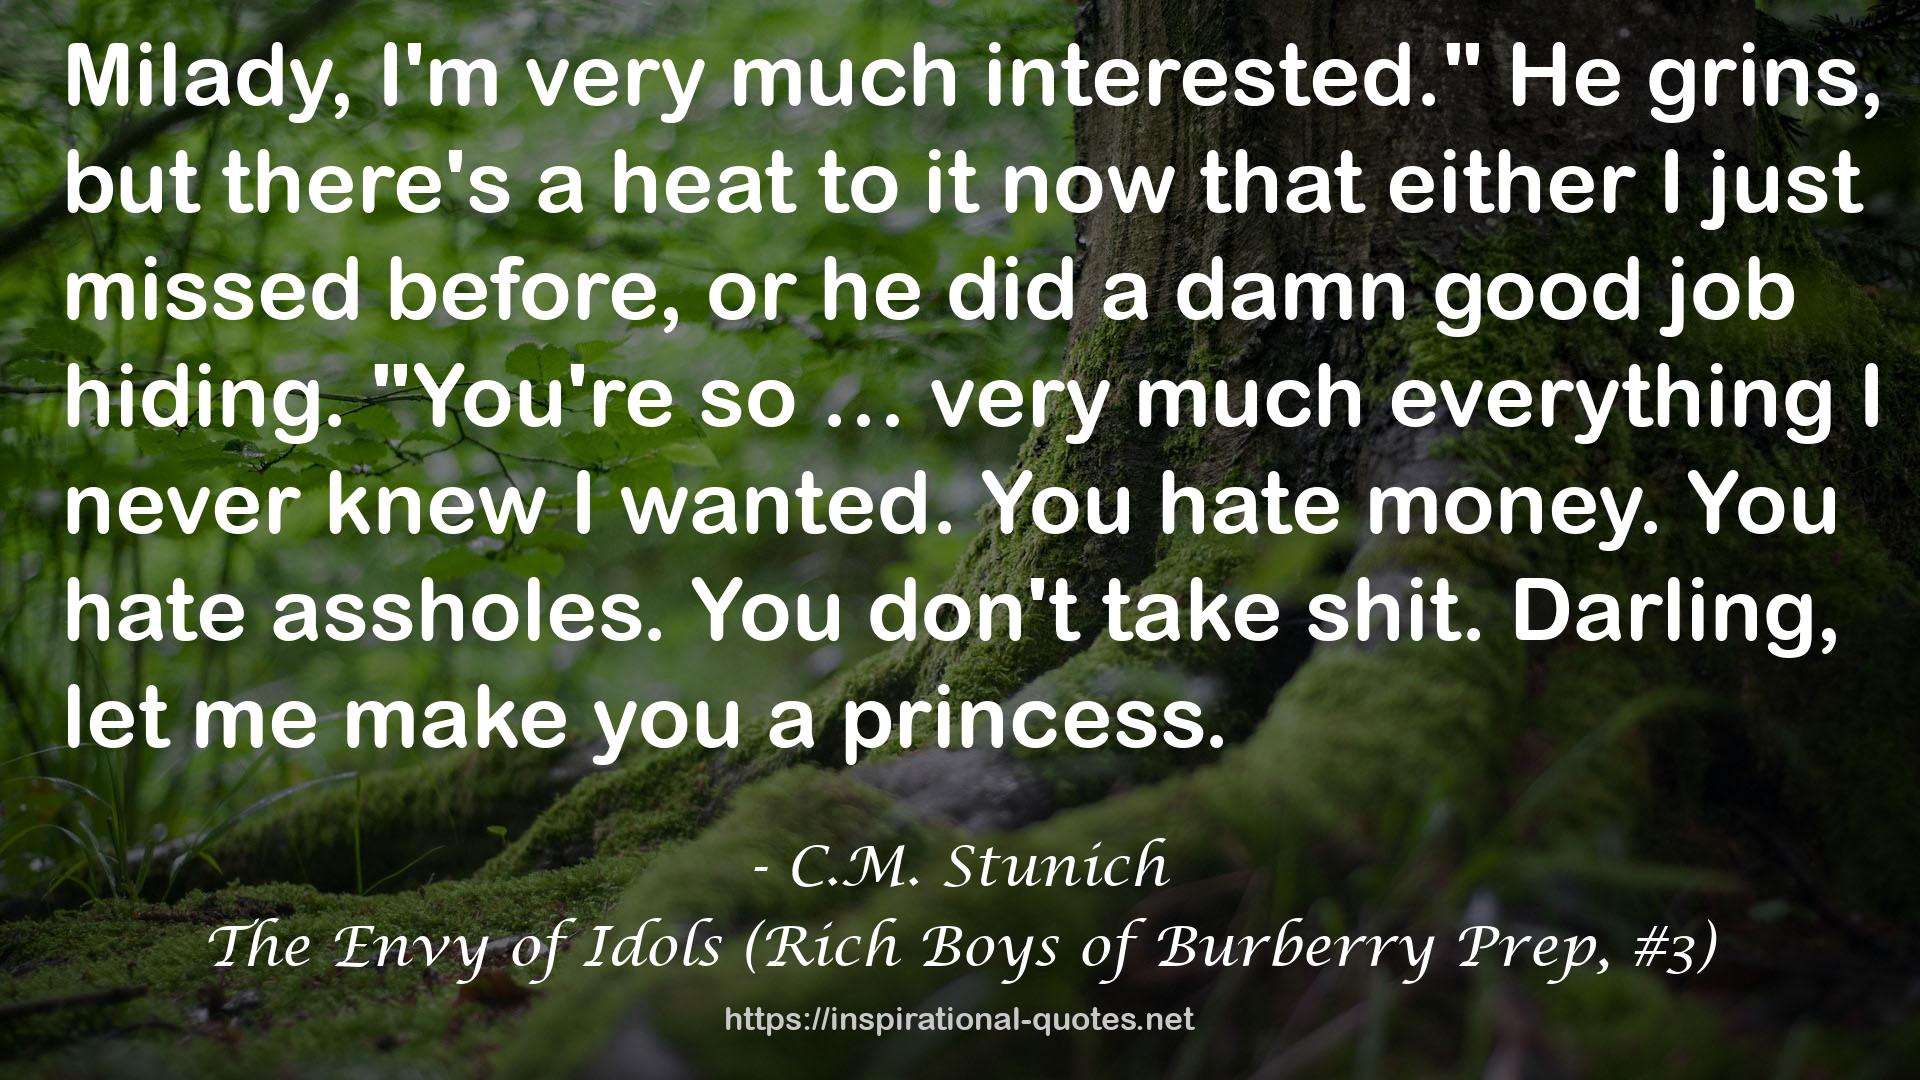 The Envy of Idols (Rich Boys of Burberry Prep, #3) QUOTES